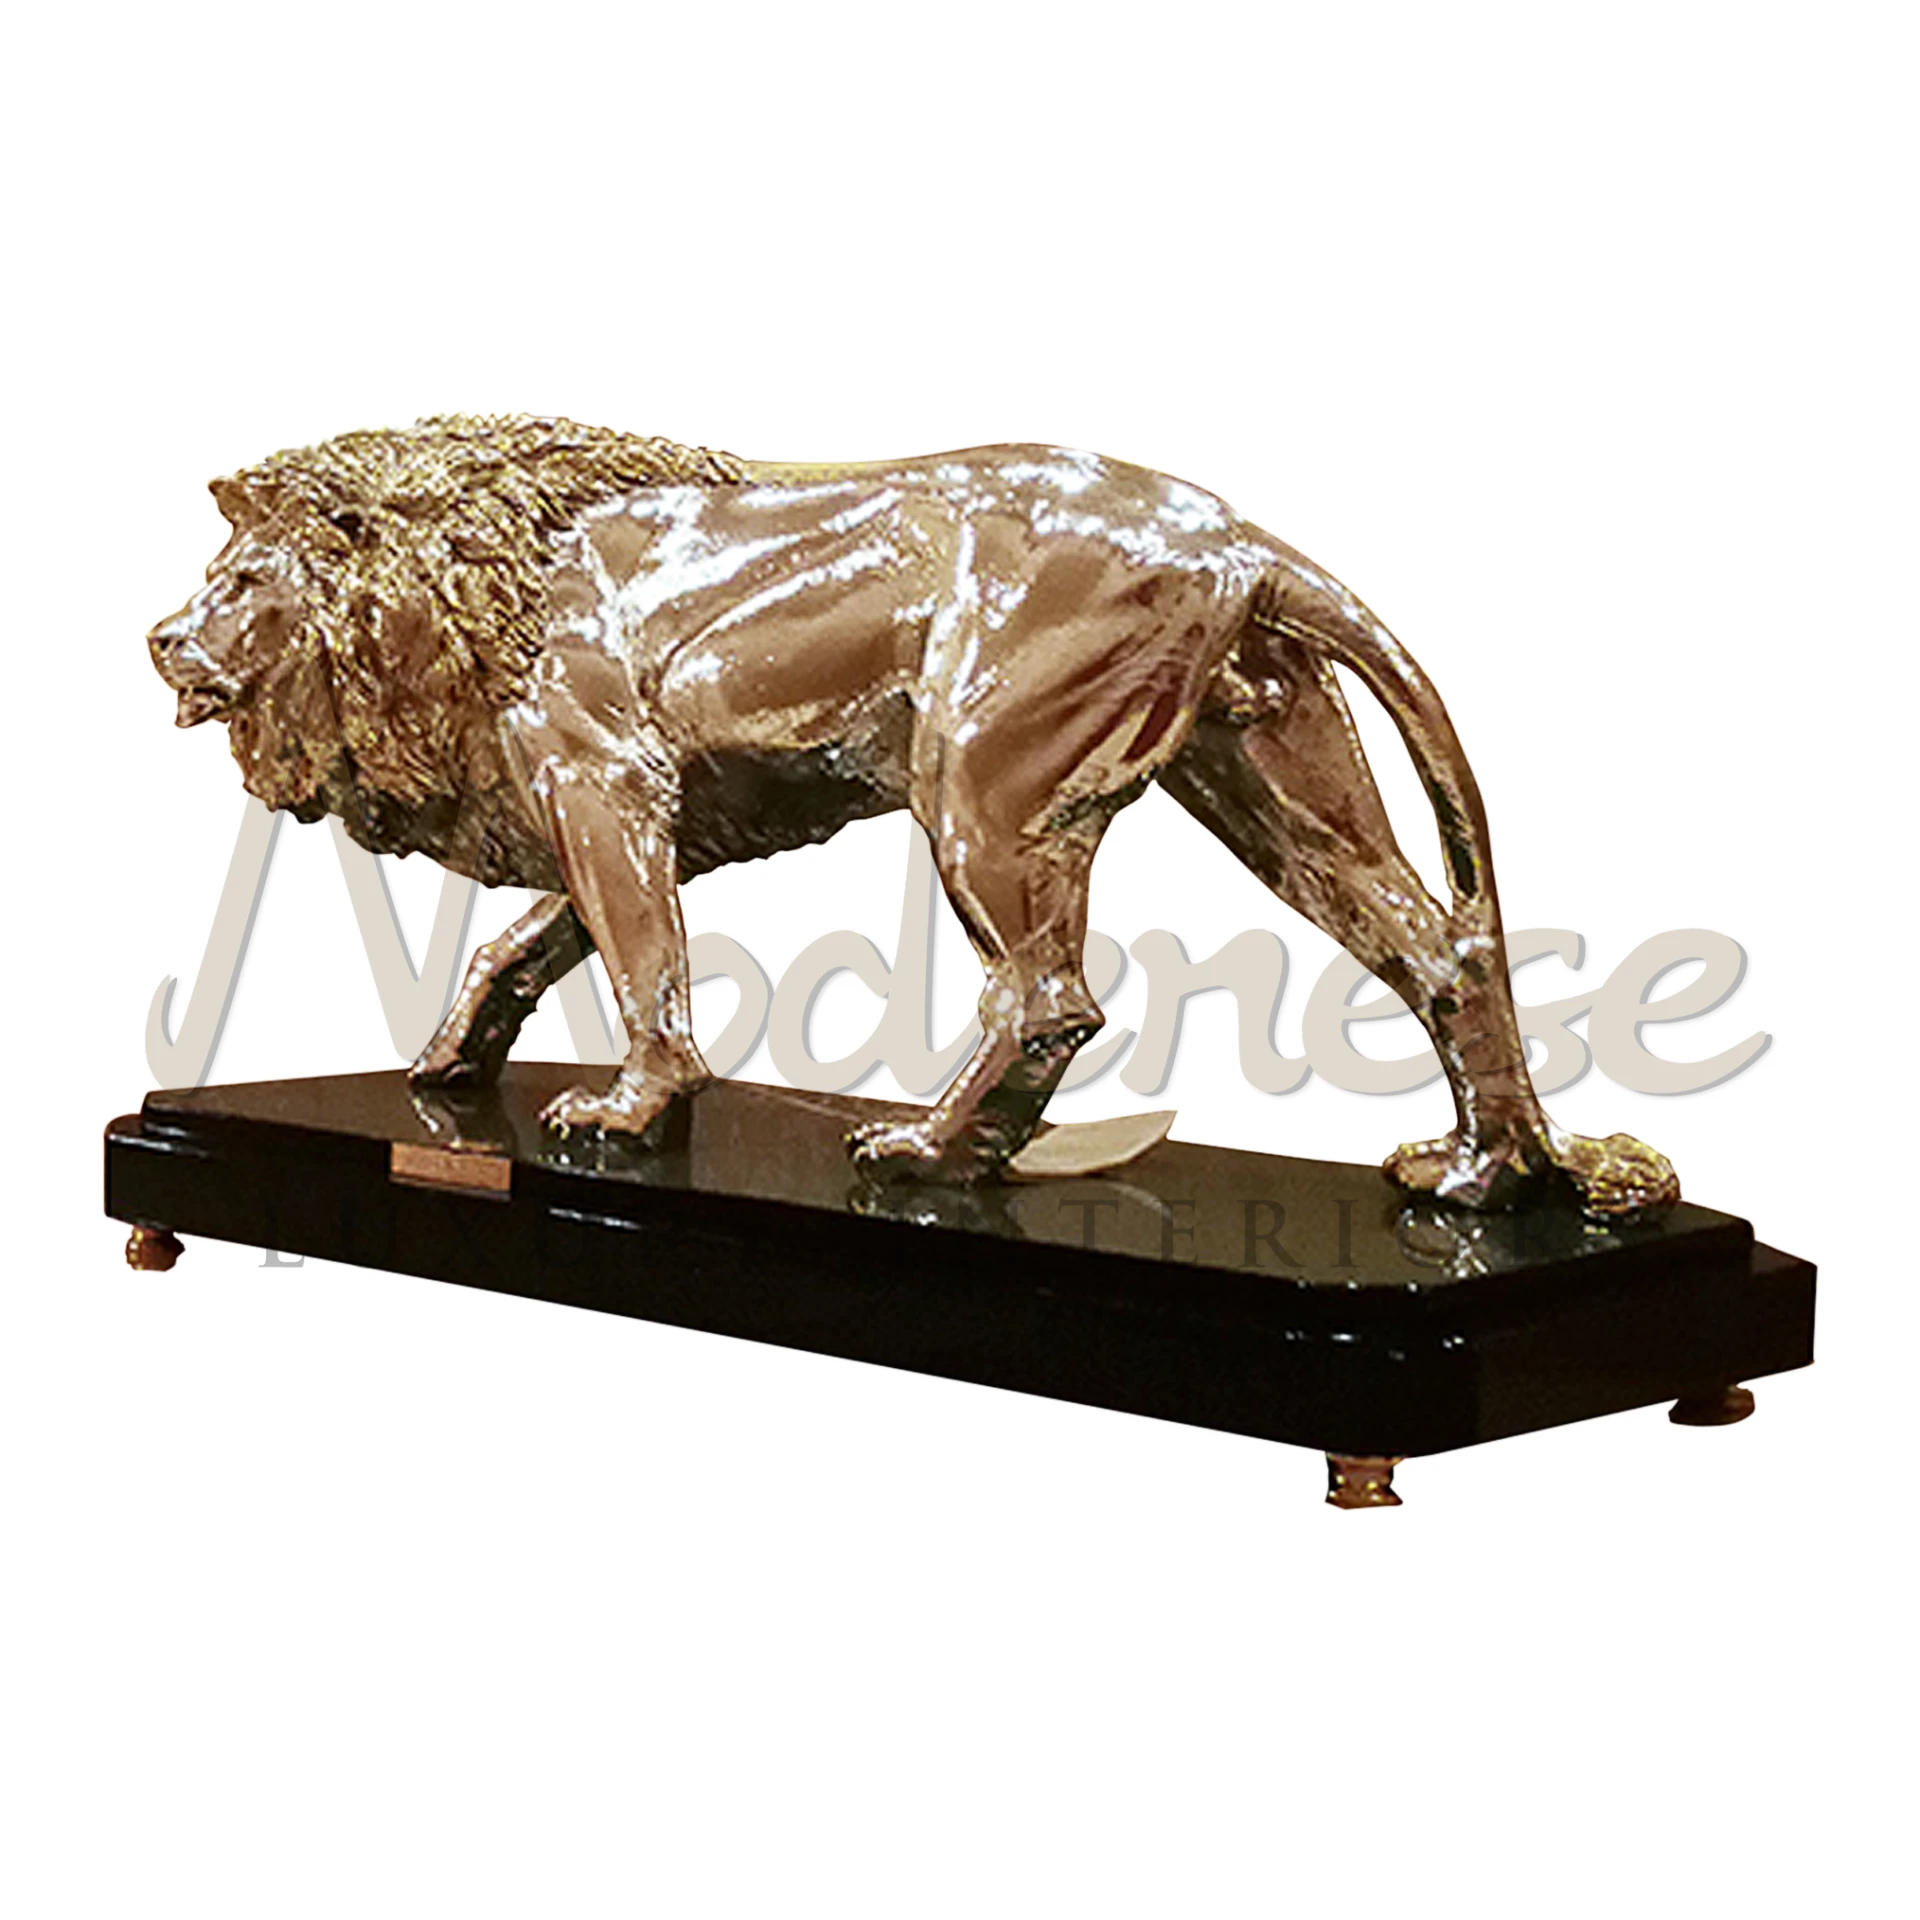 Exquisite Powerful Lion statuette with gold leaf finish, embodying classic style and majesty for luxury interior design.